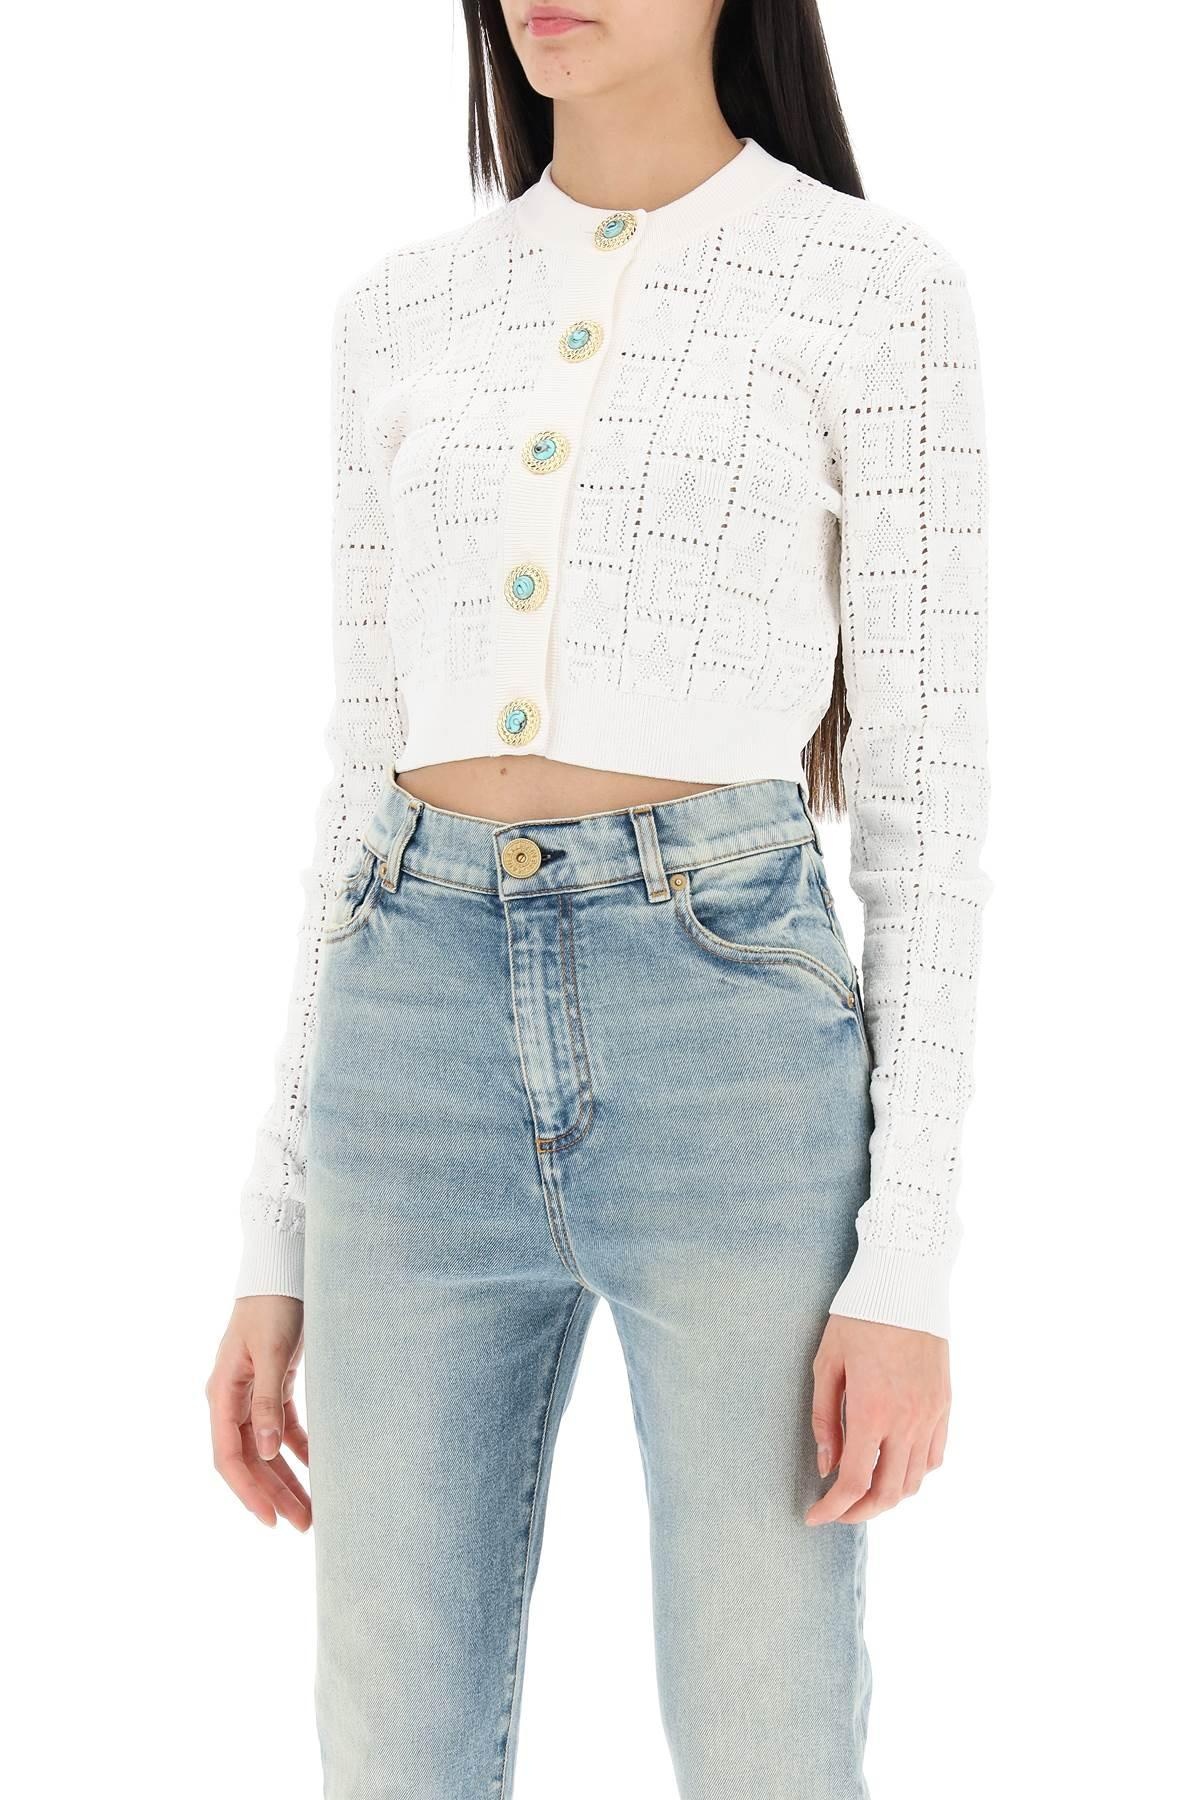 Balmain Cropped Cardigan With Jewel Buttons - 5